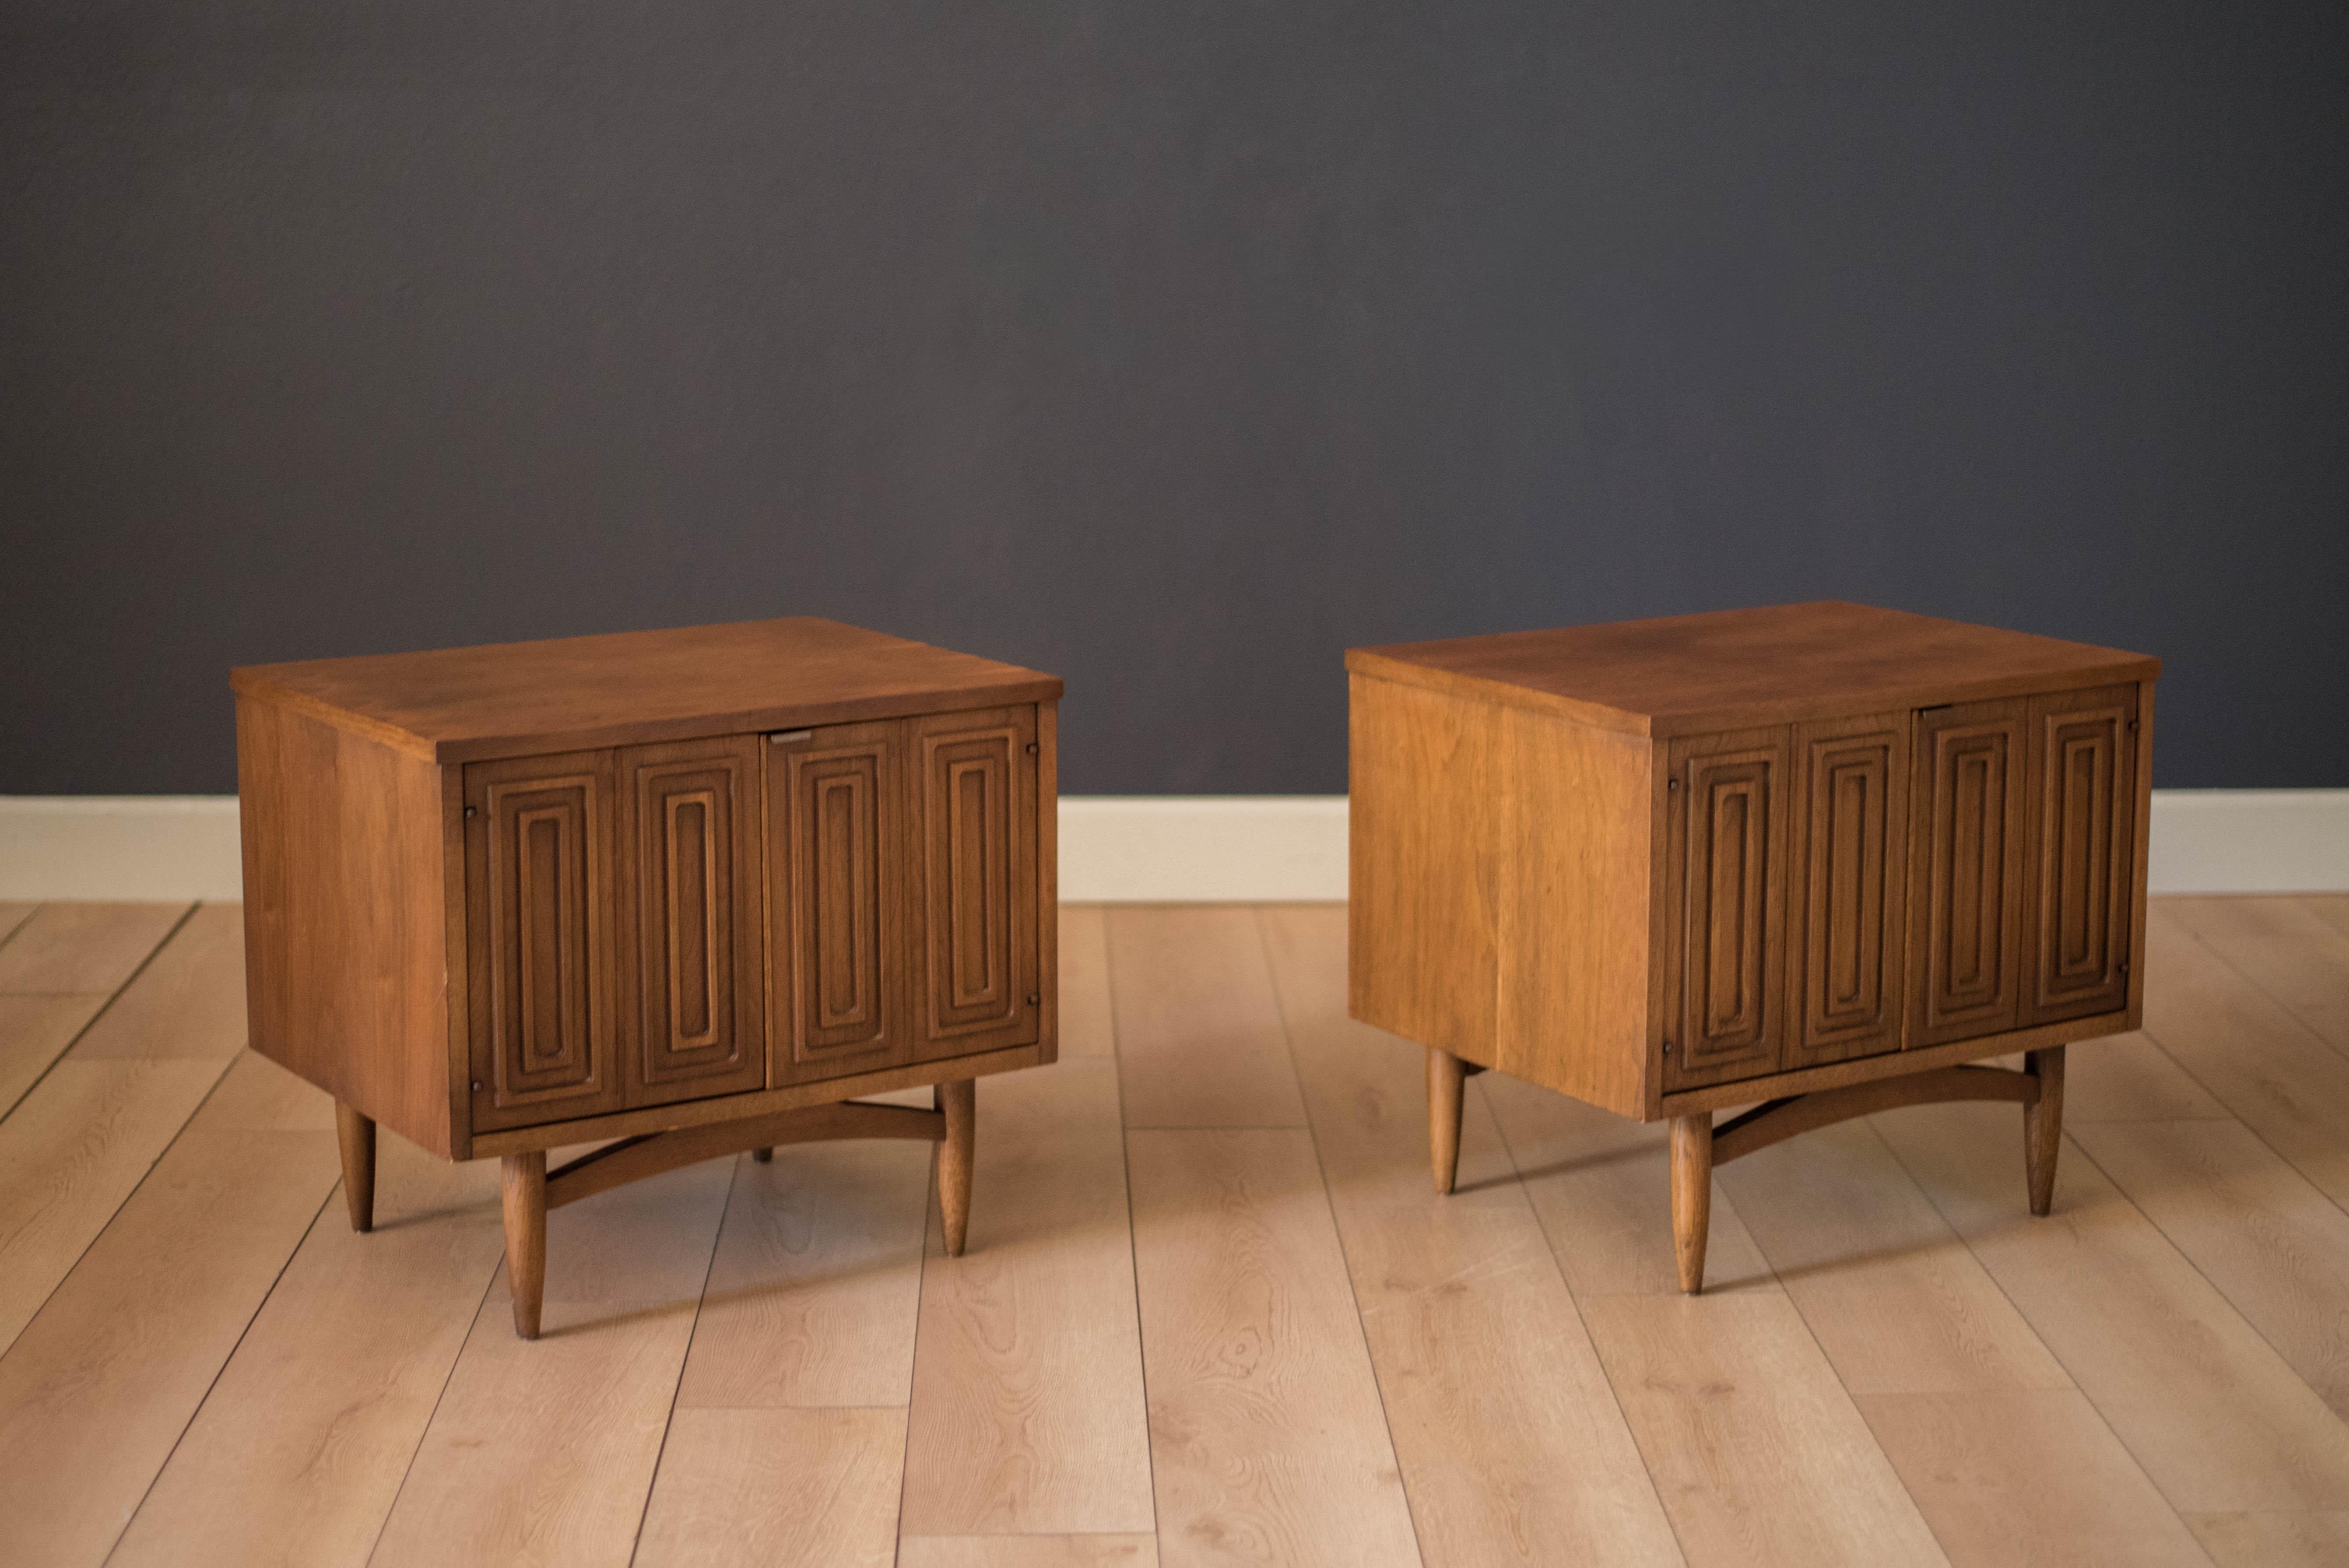 Vintage set of Sculptra nightstands or commodes by Broyhill in walnut and oak. Swing out doors reveal an open cabinet for plenty of storage. Alternatively, the set can be used as living room side or end tables. Price is for the pair. Matching